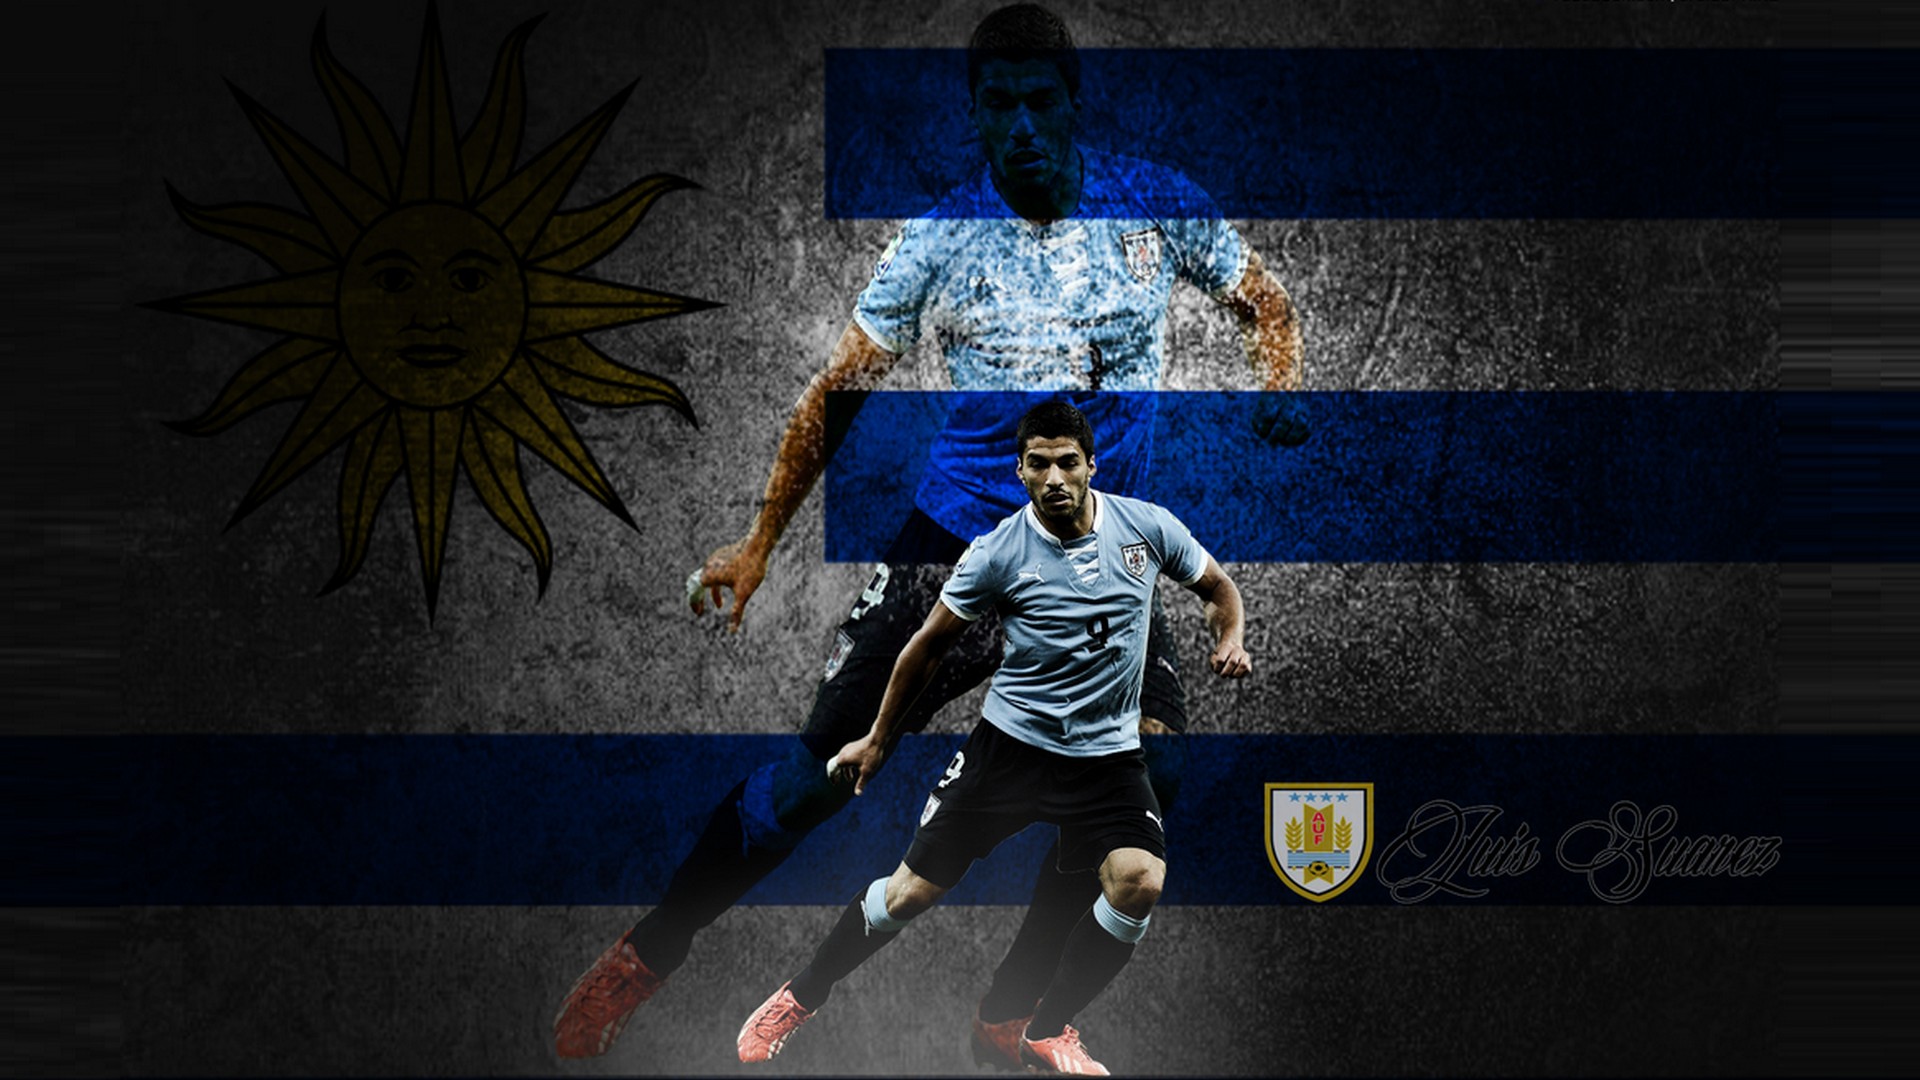 Luis Suarez Uruguay Wallpaper For Desktop with resolution 1920X1080 pixel. You can use this wallpaper as background for your desktop Computer Screensavers, Android or iPhone smartphones